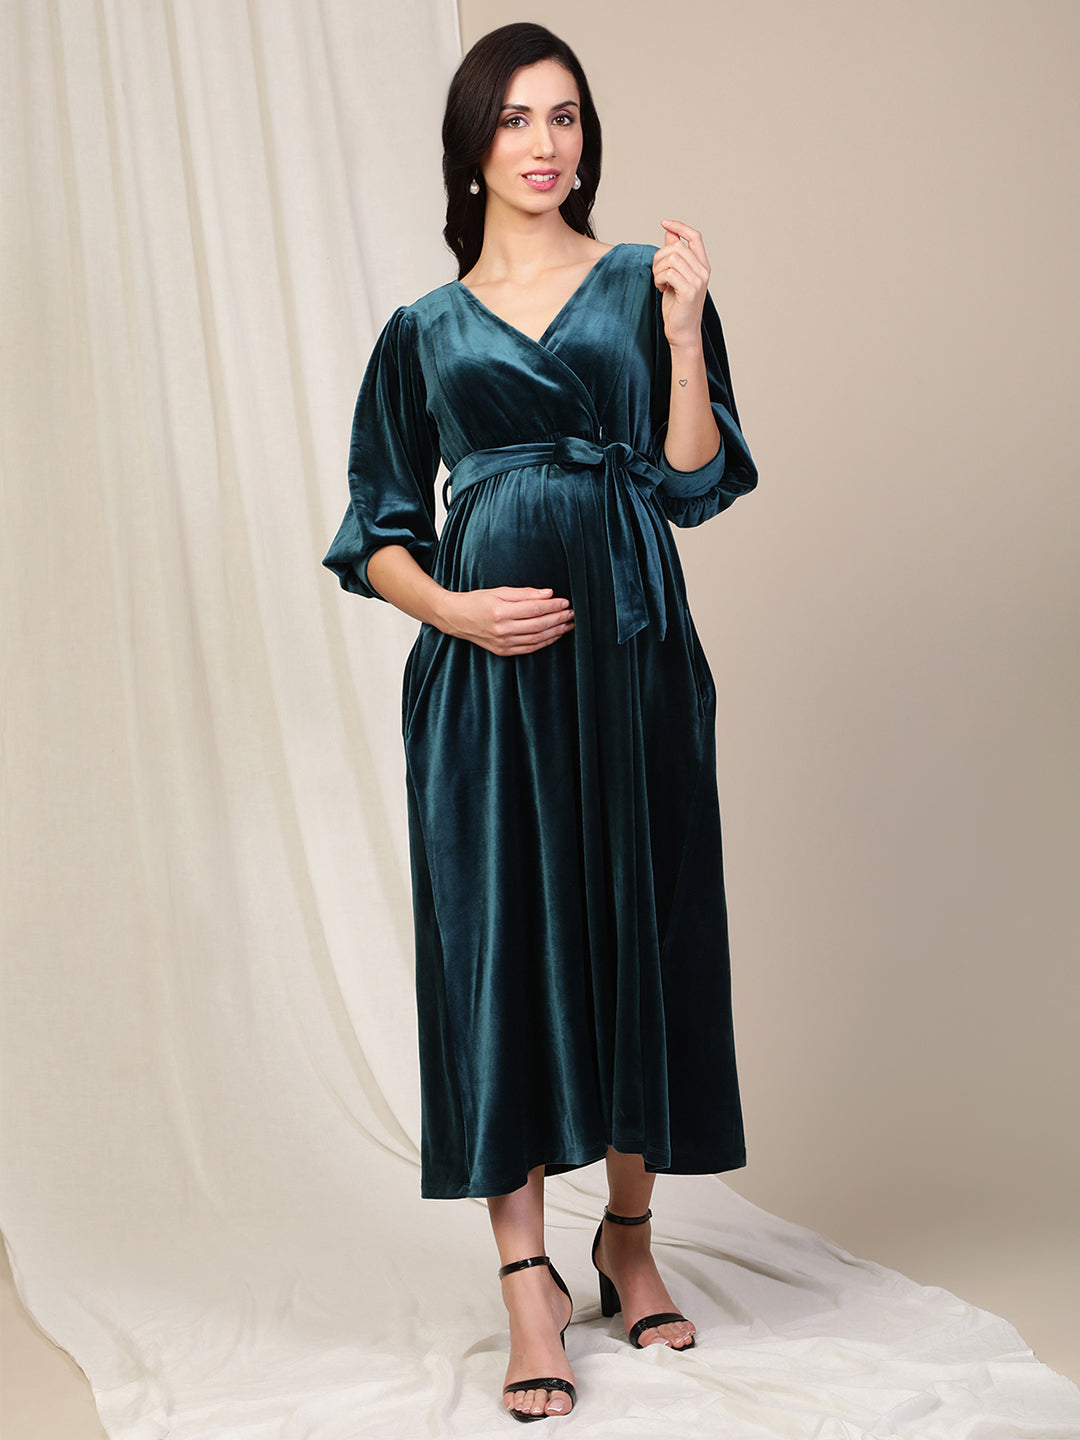 fcity.in - R9116799 / Comfy Partywear Women Maternity Dresses